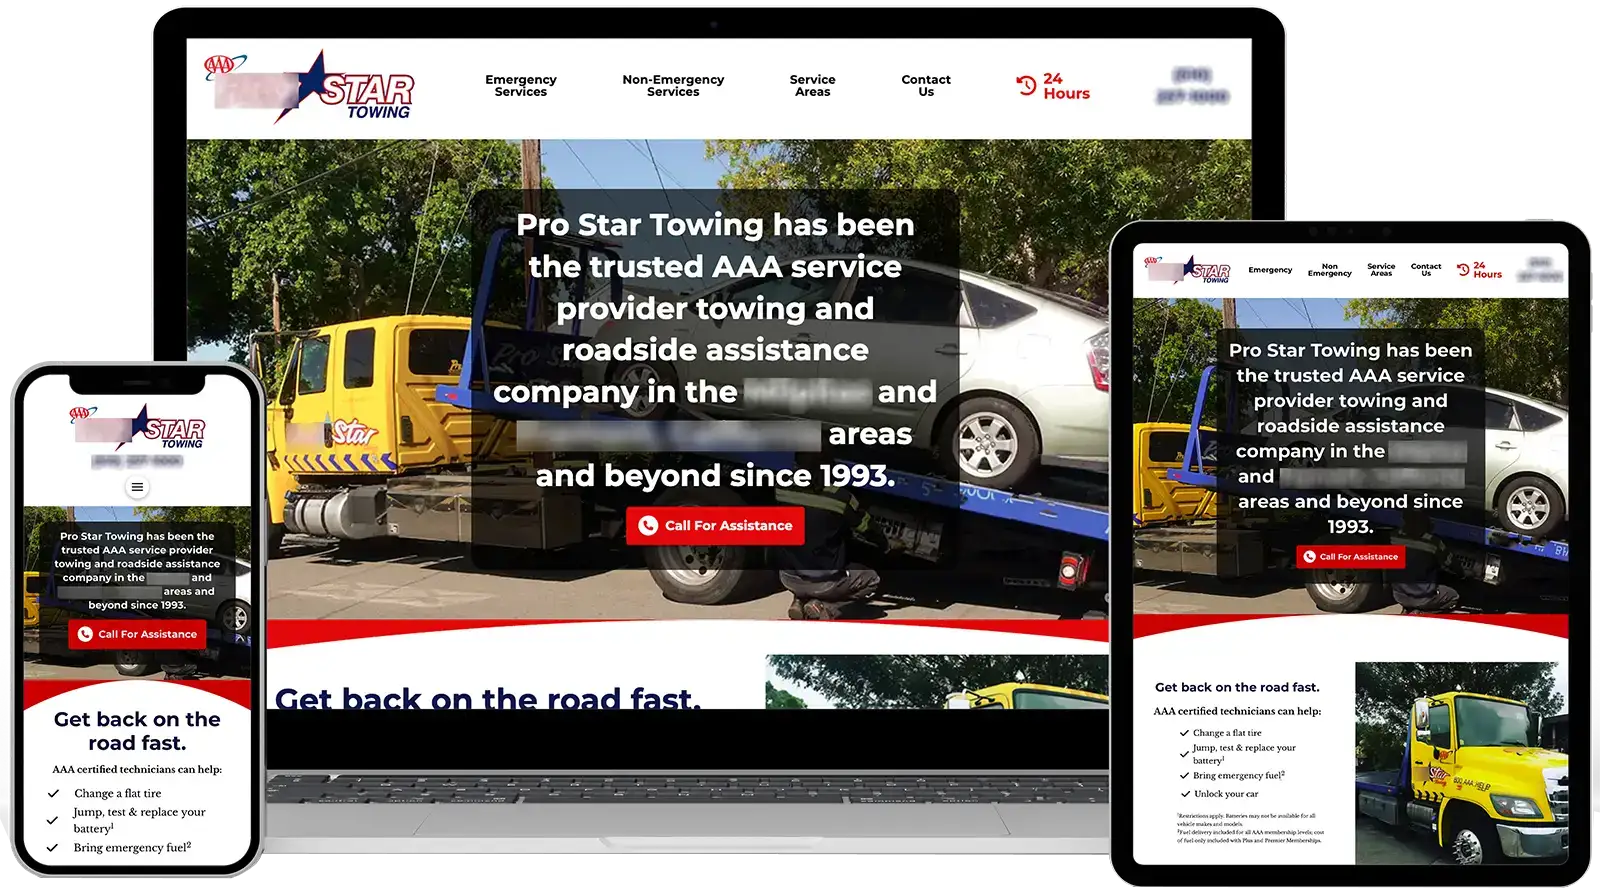 Towing Company Website